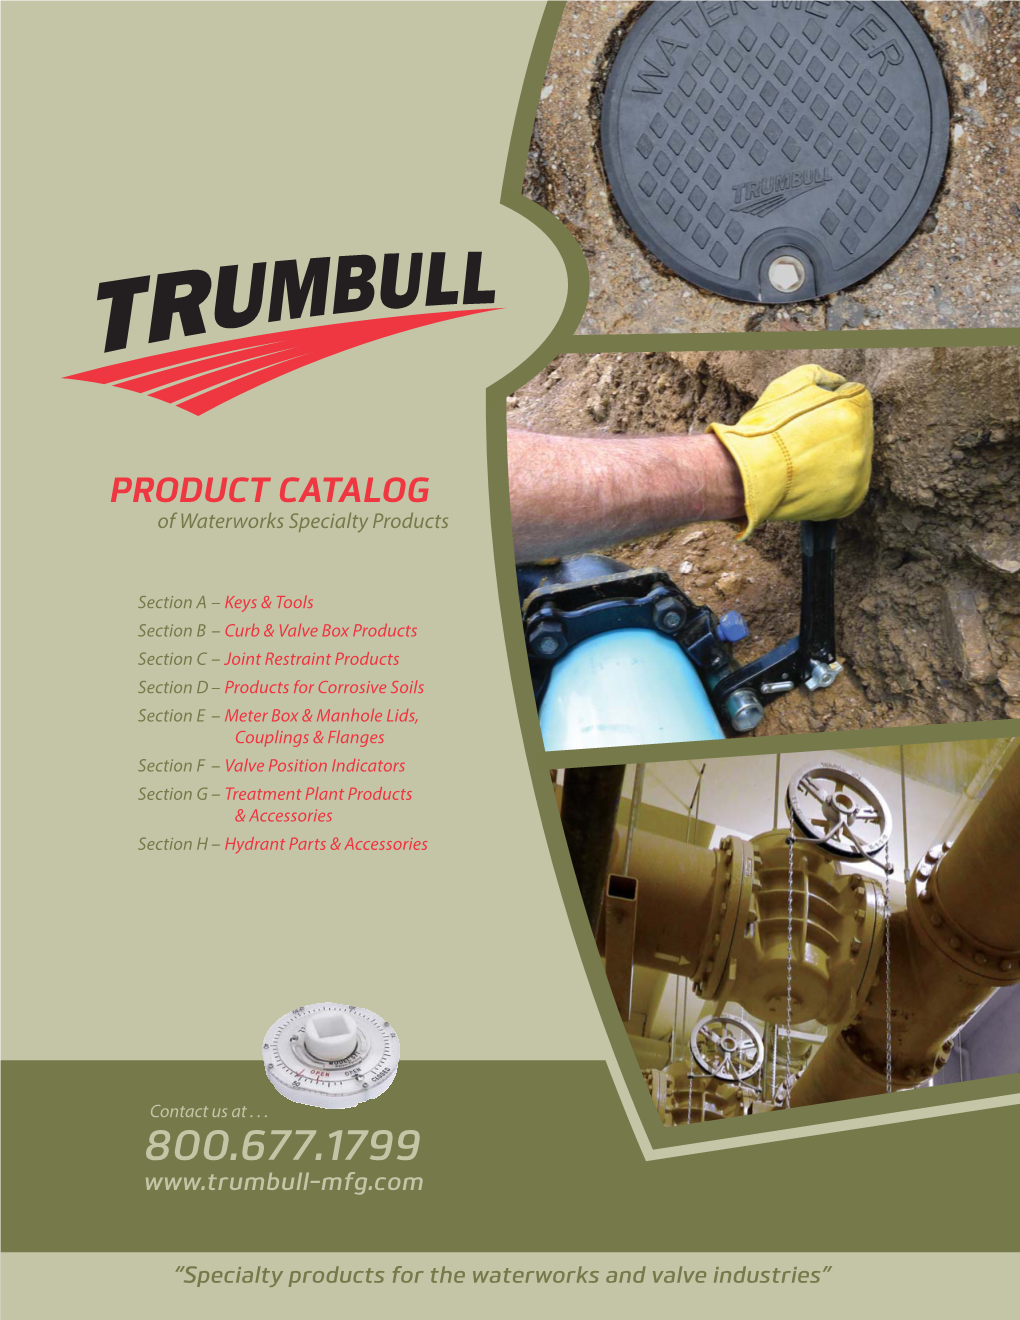 PRODUCT CATALOG of Waterworks Specialty Products